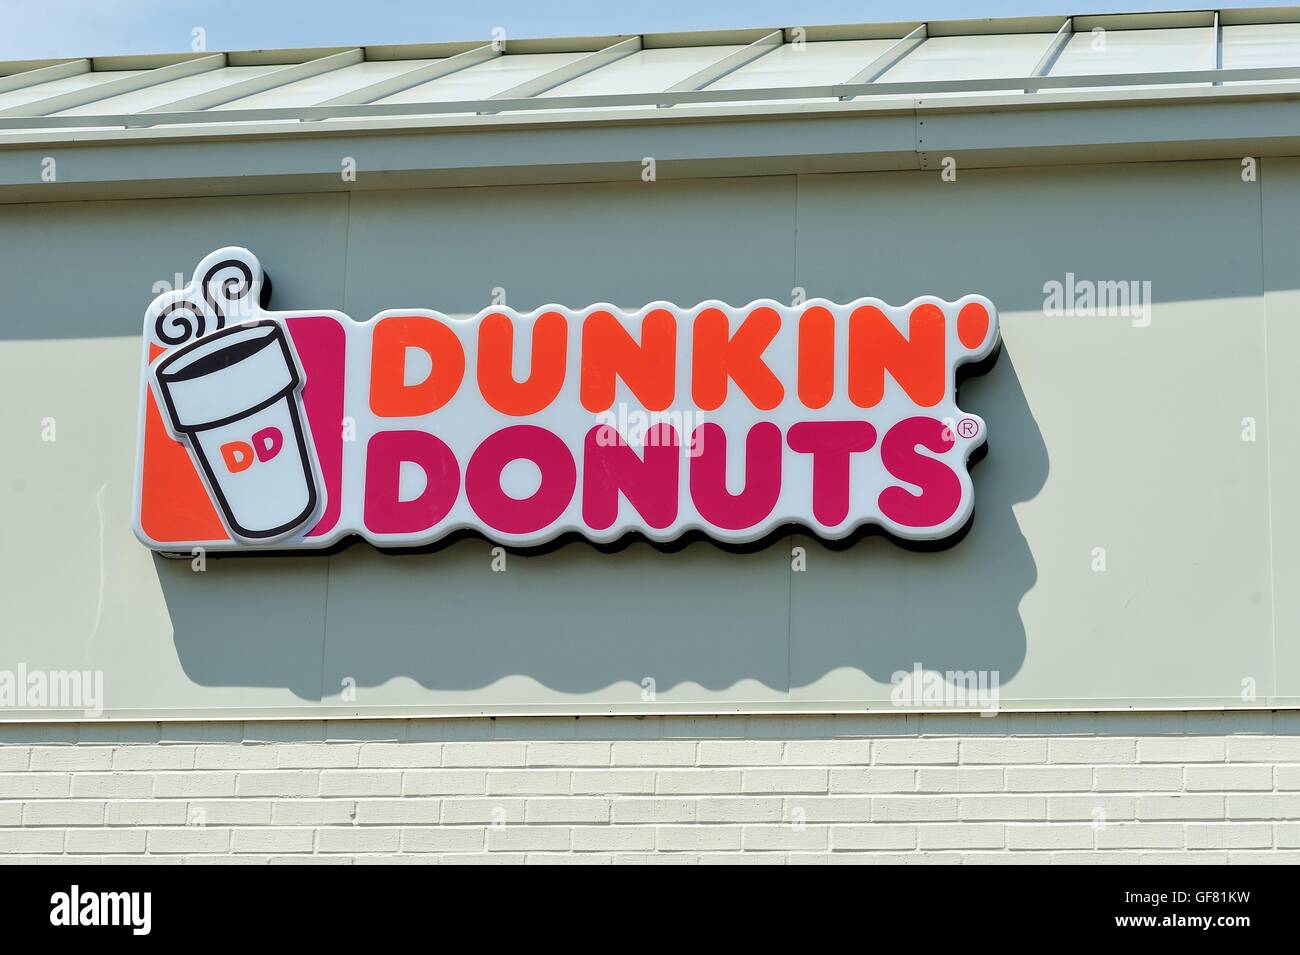 Recognizable national and regional brand locations abound in urban areas such as this Dunkin' Donuts sign. Bartlett, Illinois, USA. Stock Photo